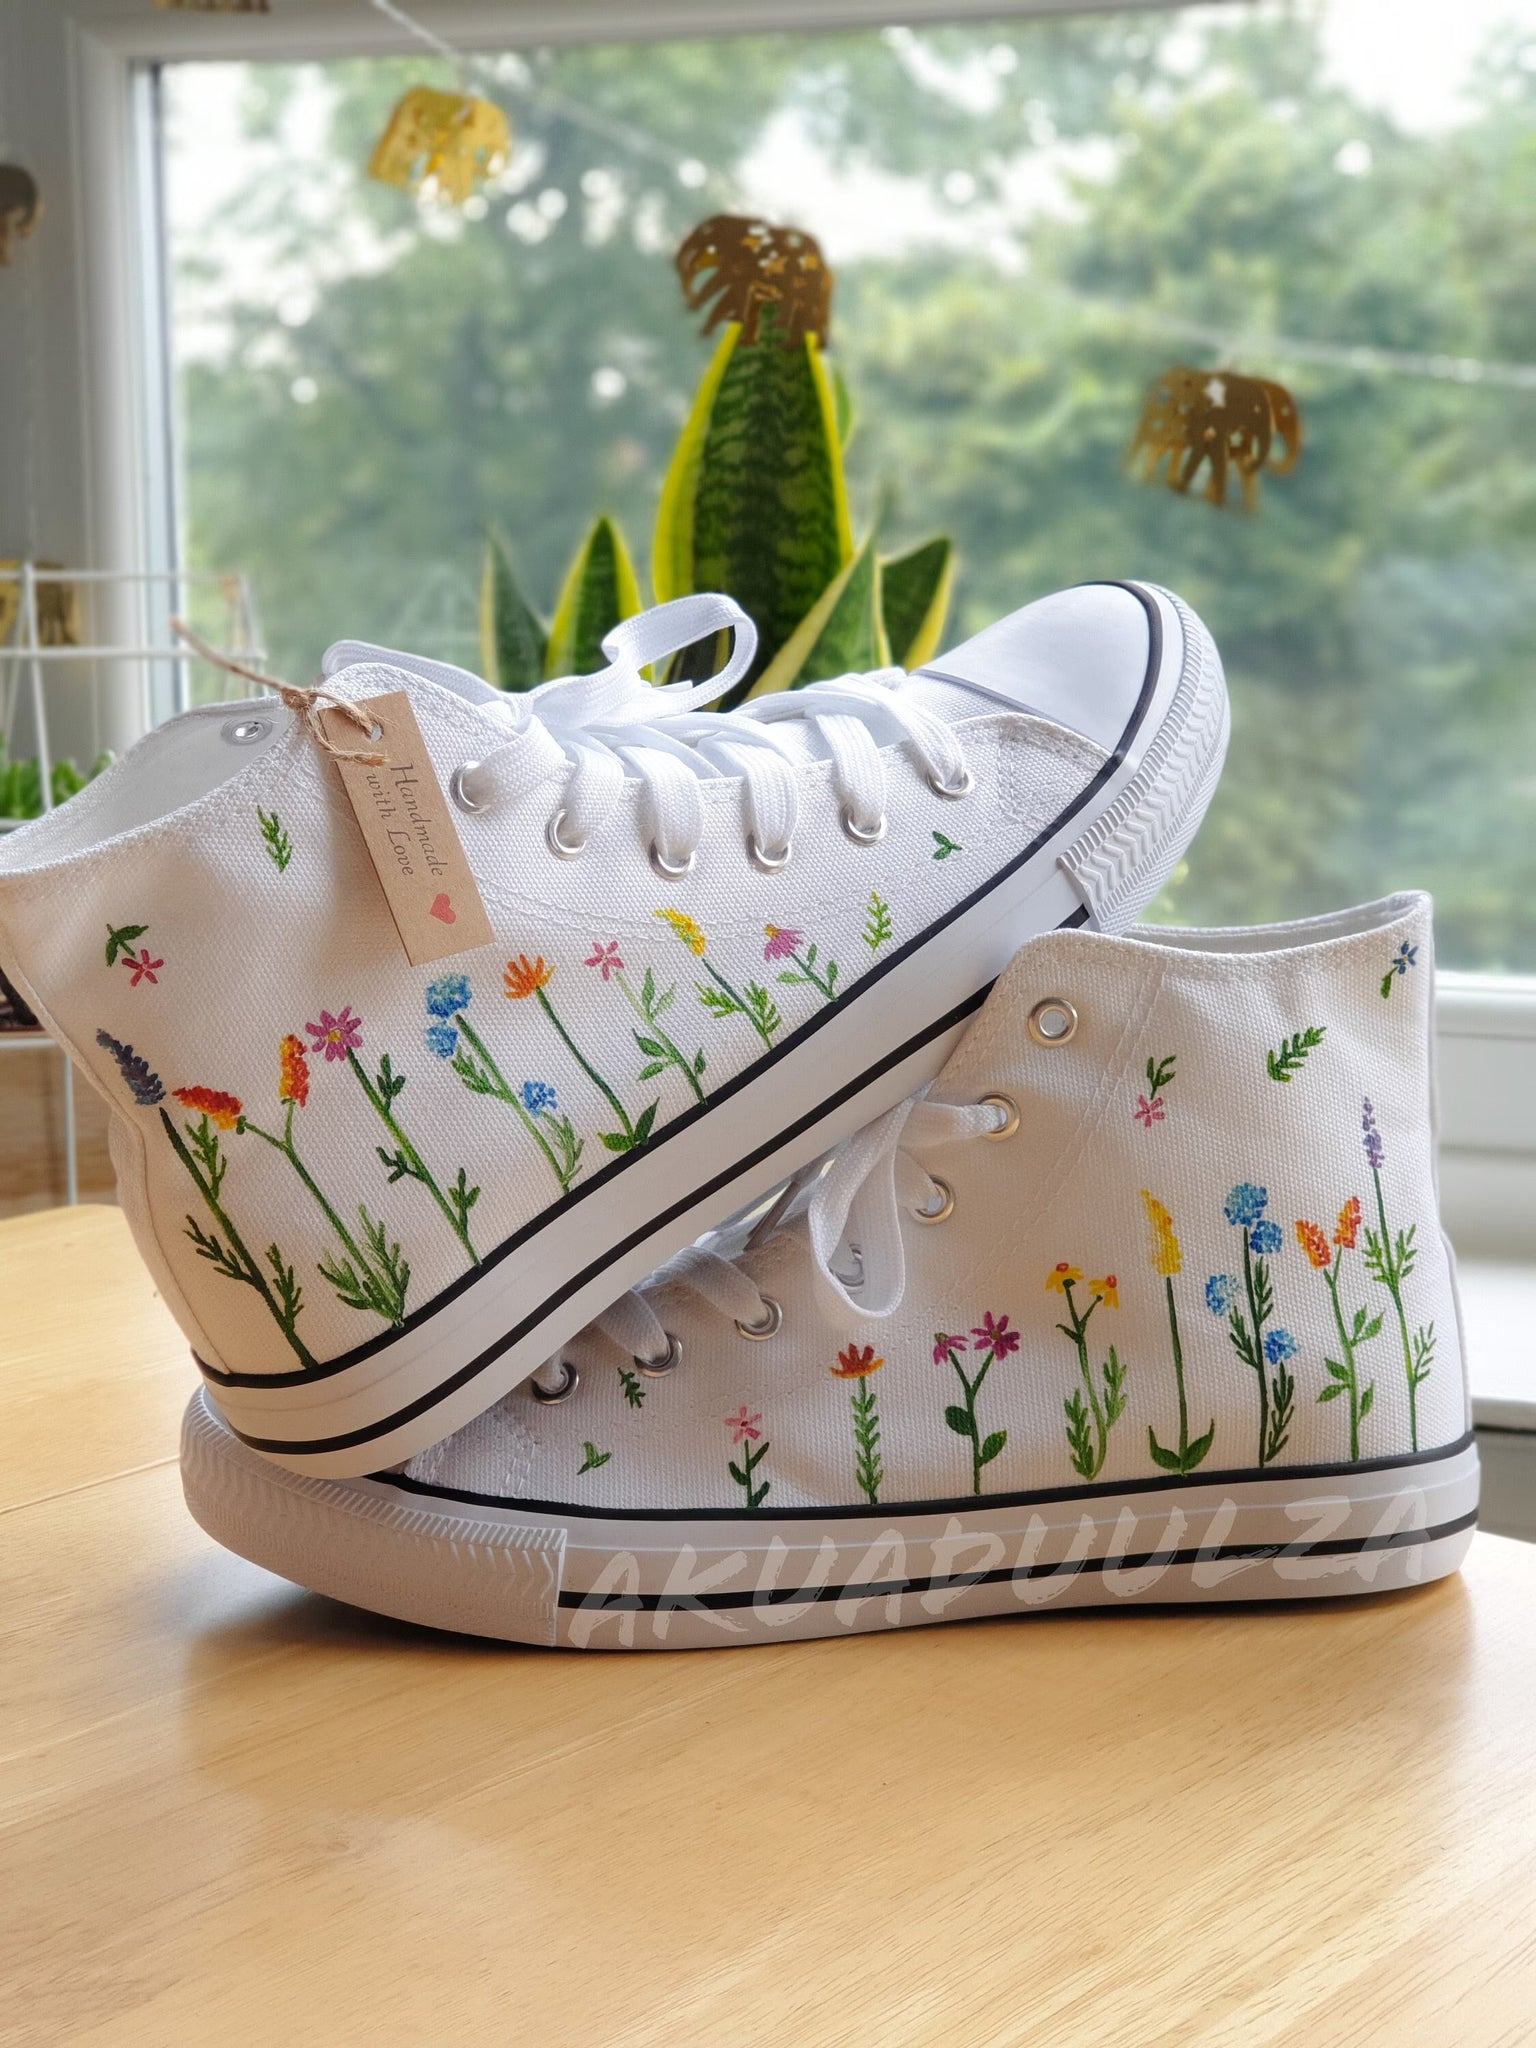 Artistic Flair Meets Functionality: Custom Canvas Shoes